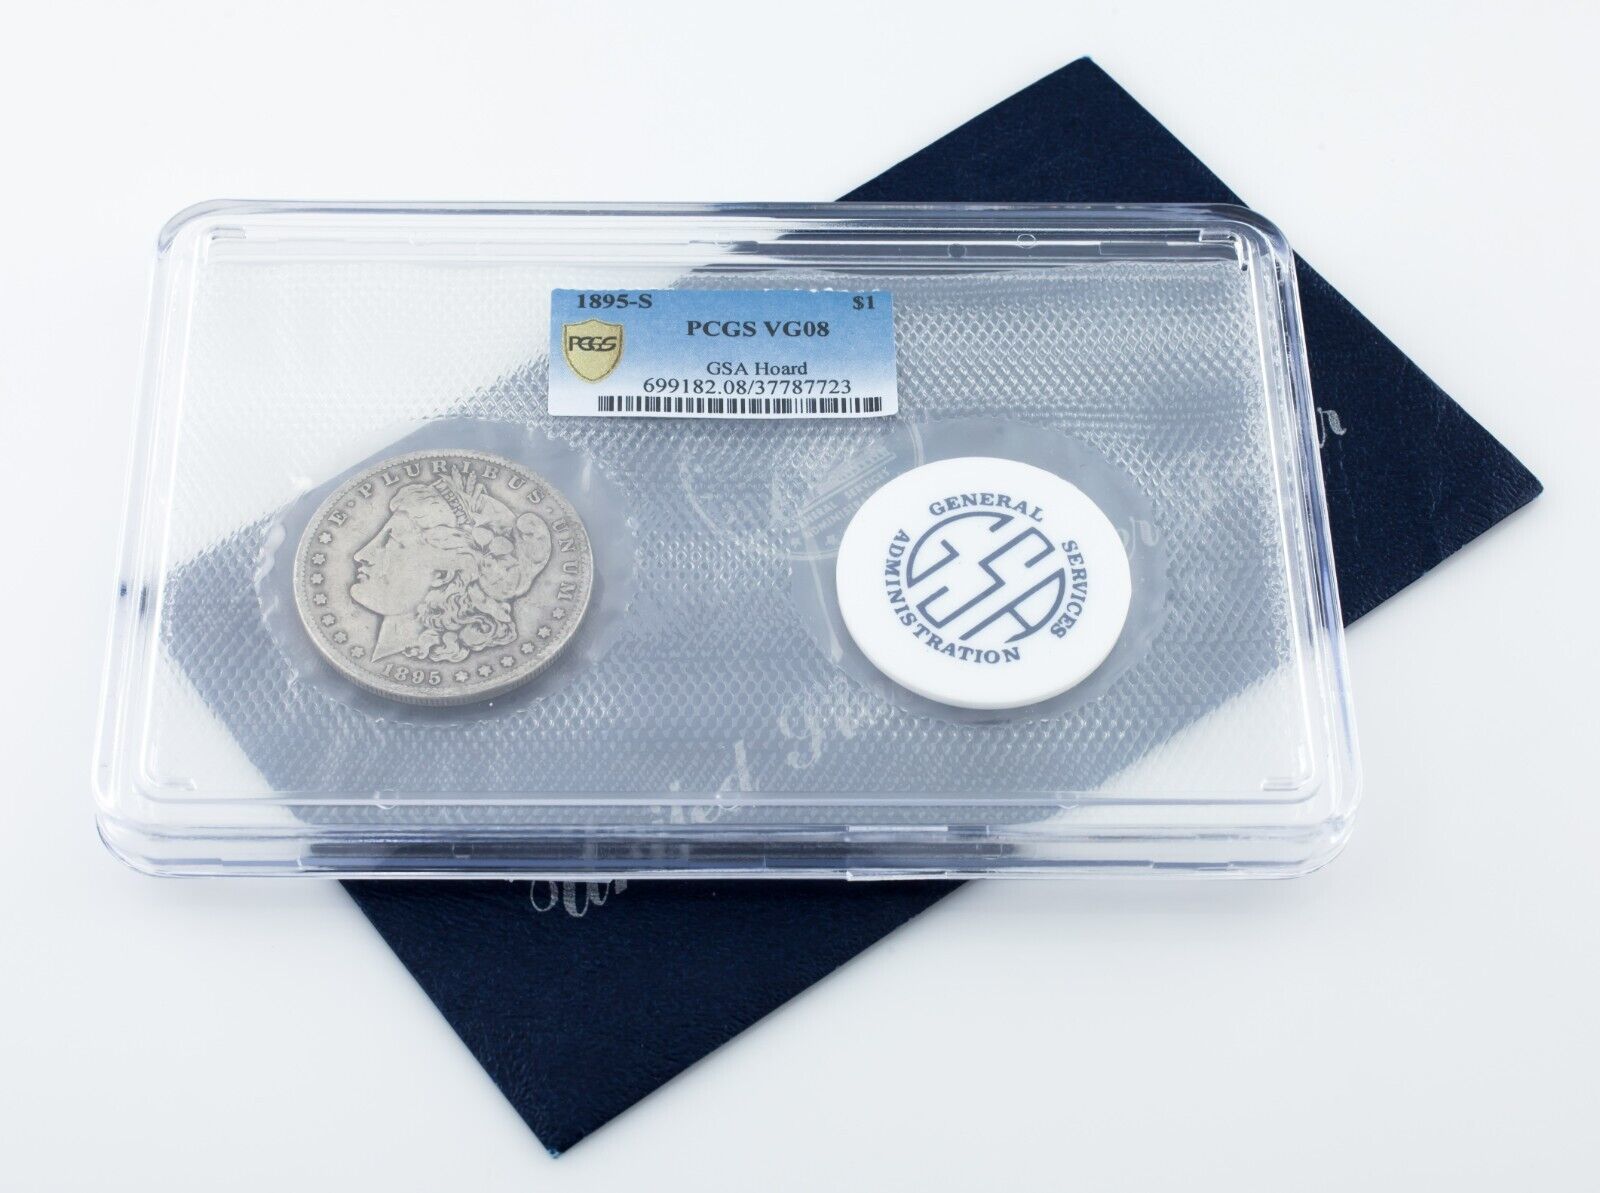 1895-S $1 Silver Morgan Dollar GSA Softpack Graded by PCGS as VG08 w/ Pouch - $17,820.00